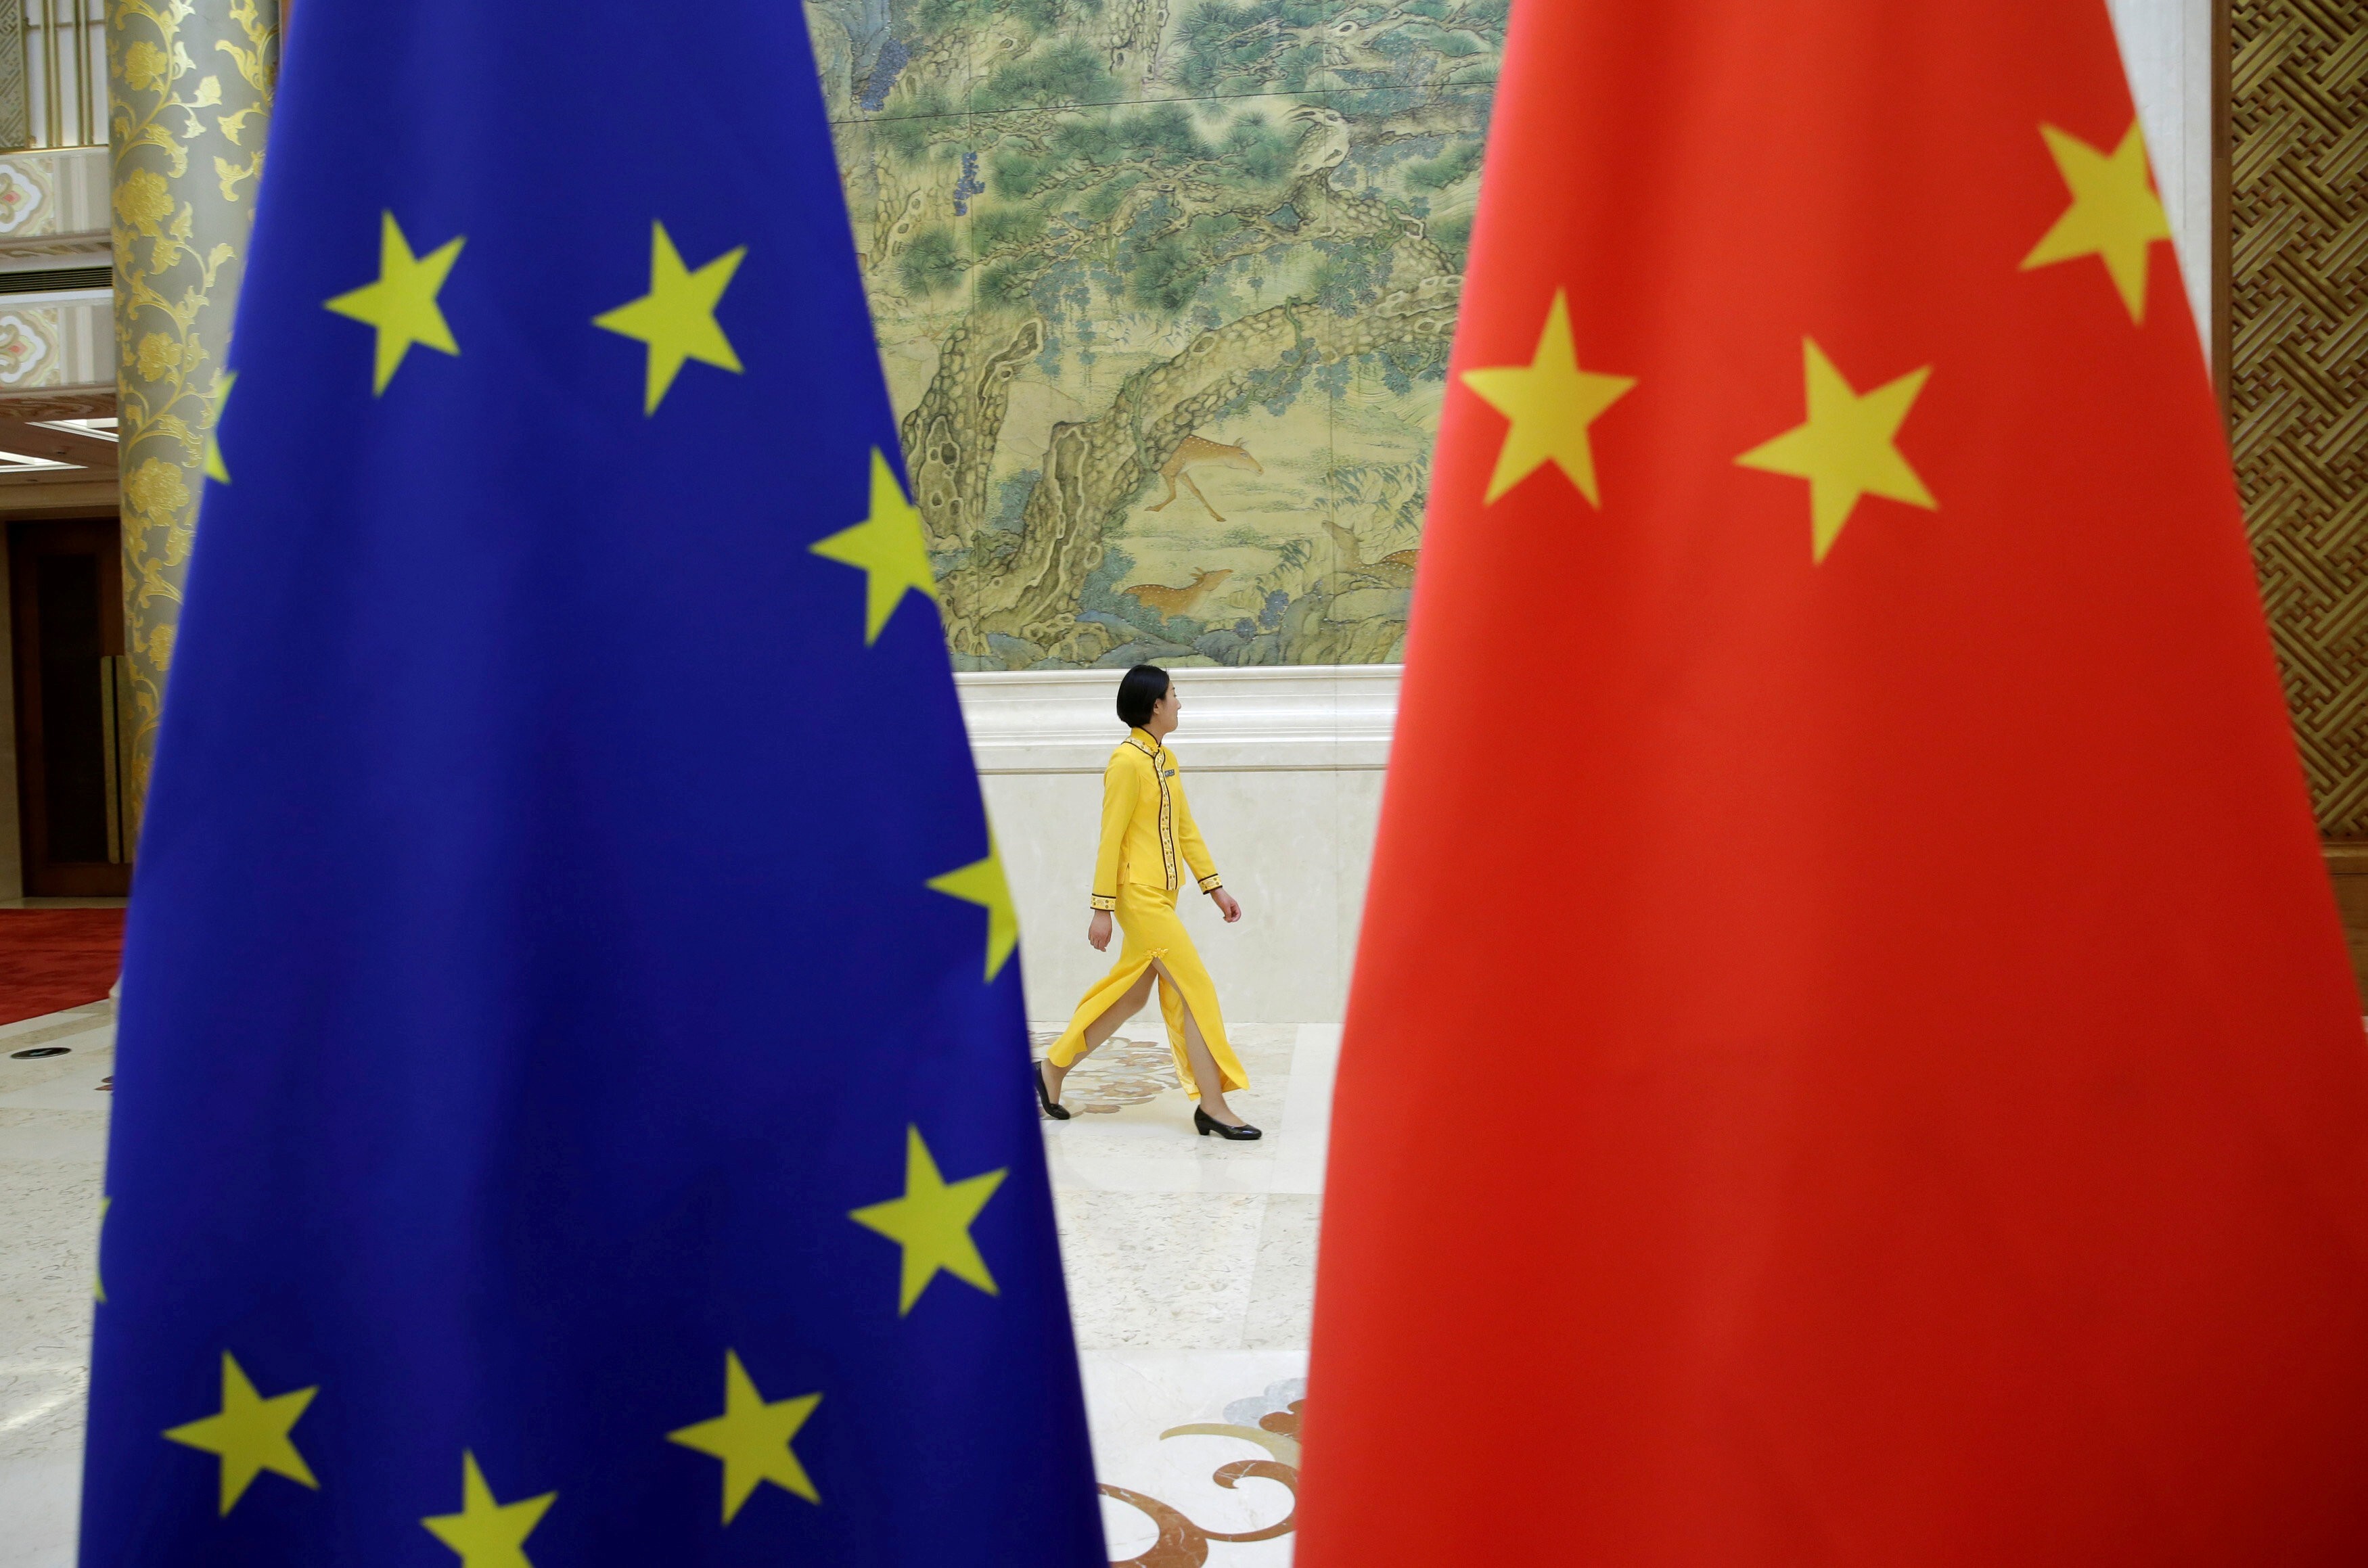 German Chancellor Angela Merkel is keen for the European Union to reach a landmark investment agreement with China this year. Photo: Reuters